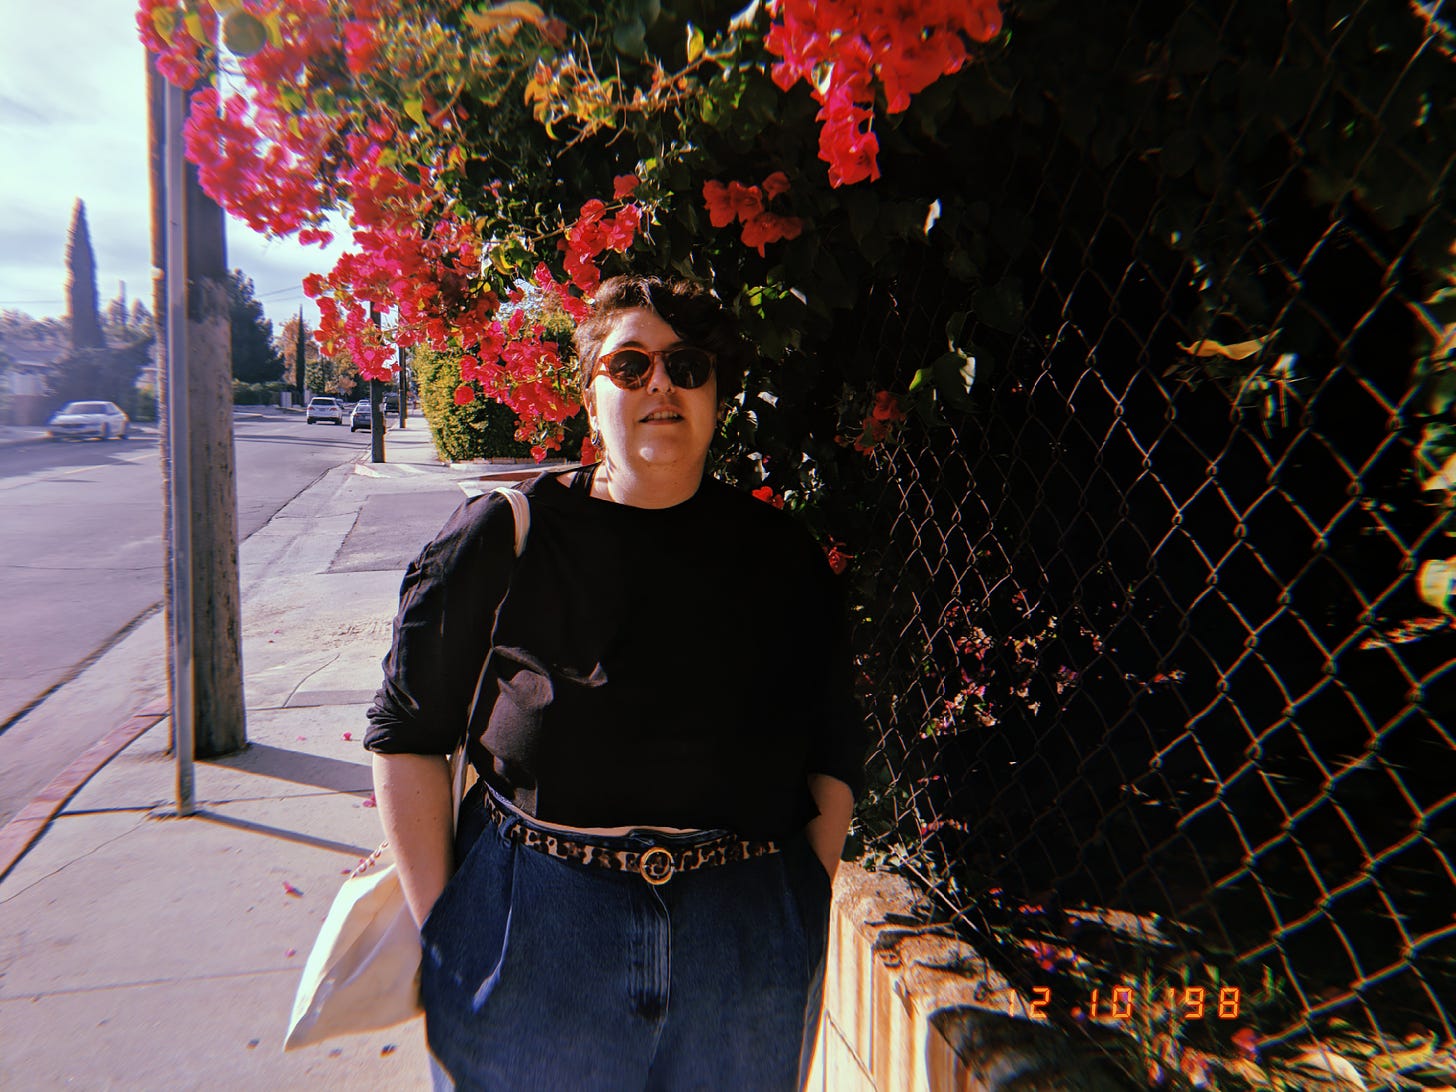 An image of me, a white non-binary person standing outside. I have on a black, long sleeve shirt, a leopard print belt, and dark high waisted jeans. My hands are in my pockets and there's a tote bag draped over my shoulder. I also have on sunglasses that are brown. I am smiling slightly, and have short brown hair that's longer on the right side. Next to me is a wire fence with a pink floral bush poking through.